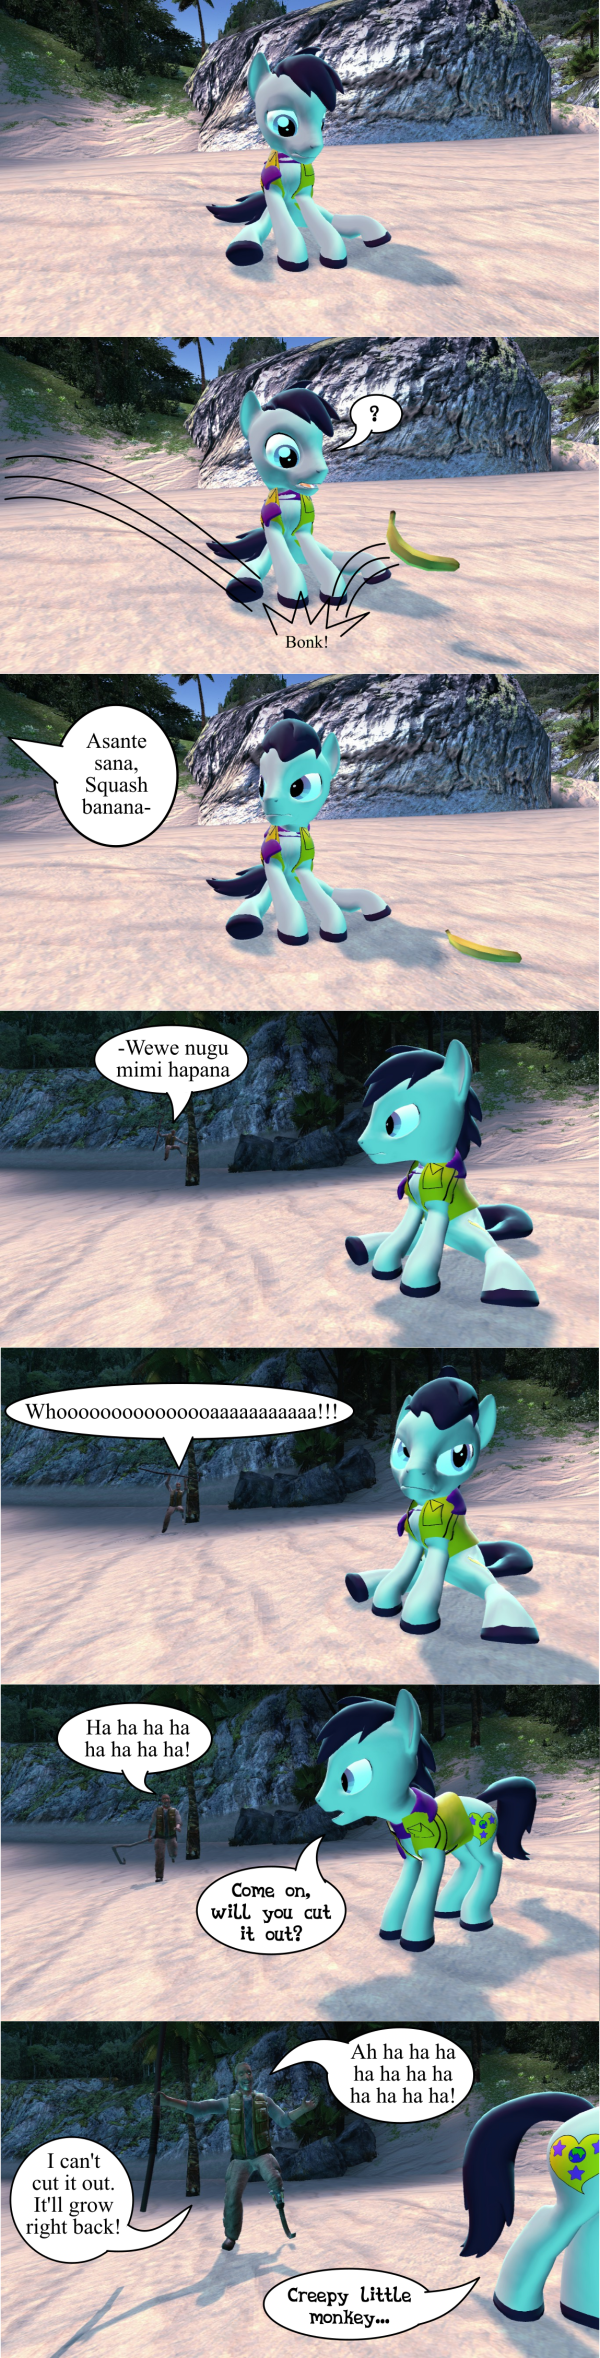 MLP Fan comic: Parody/Pointing out something